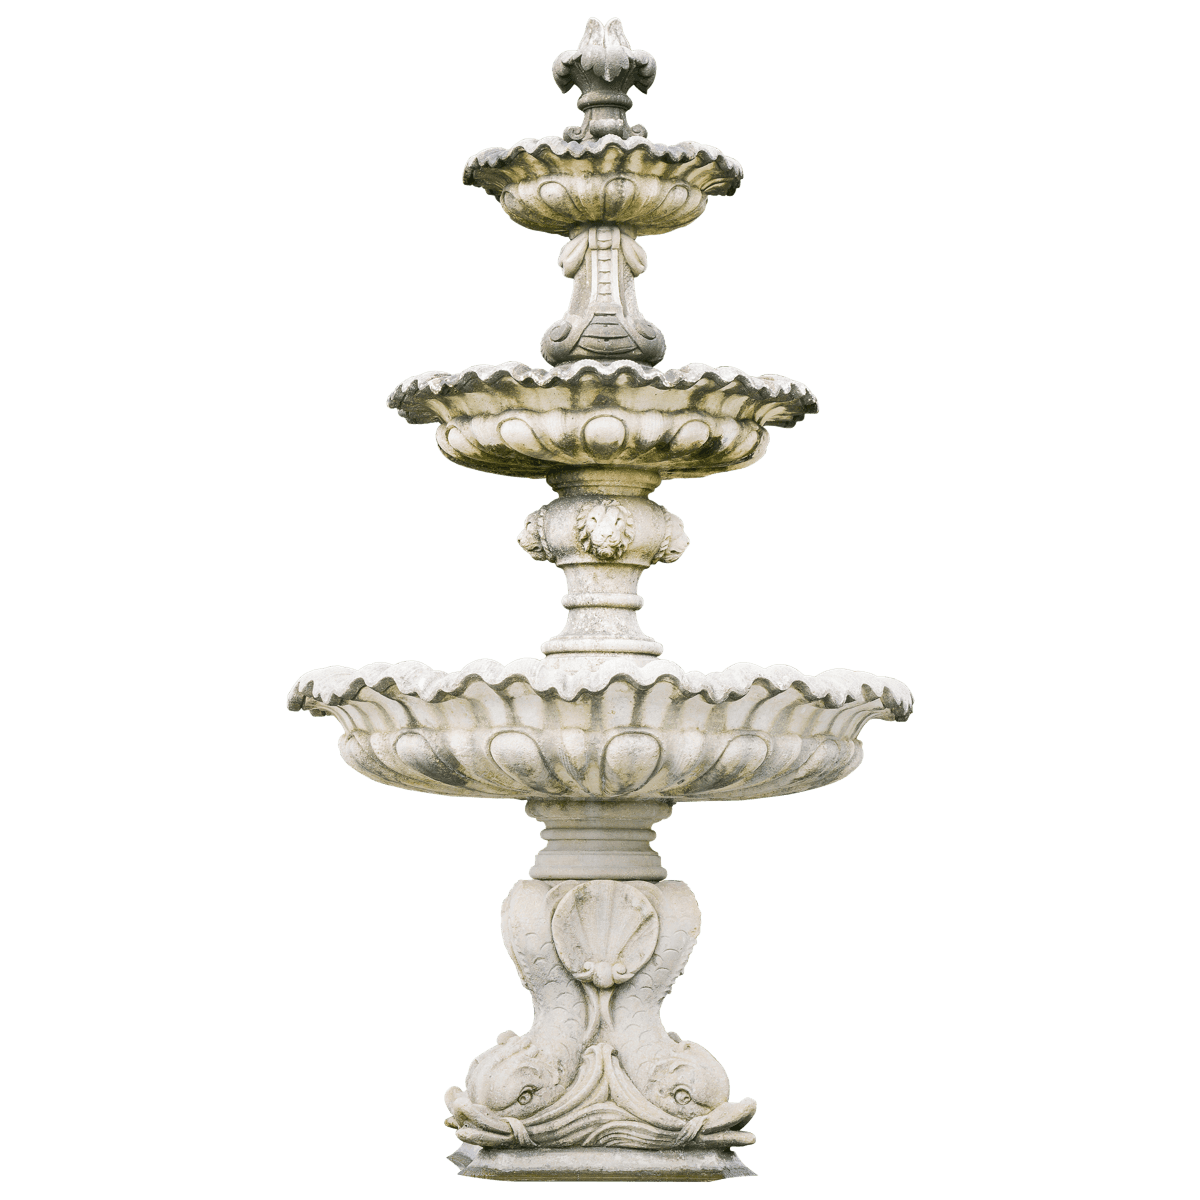 fountain clipart water feature